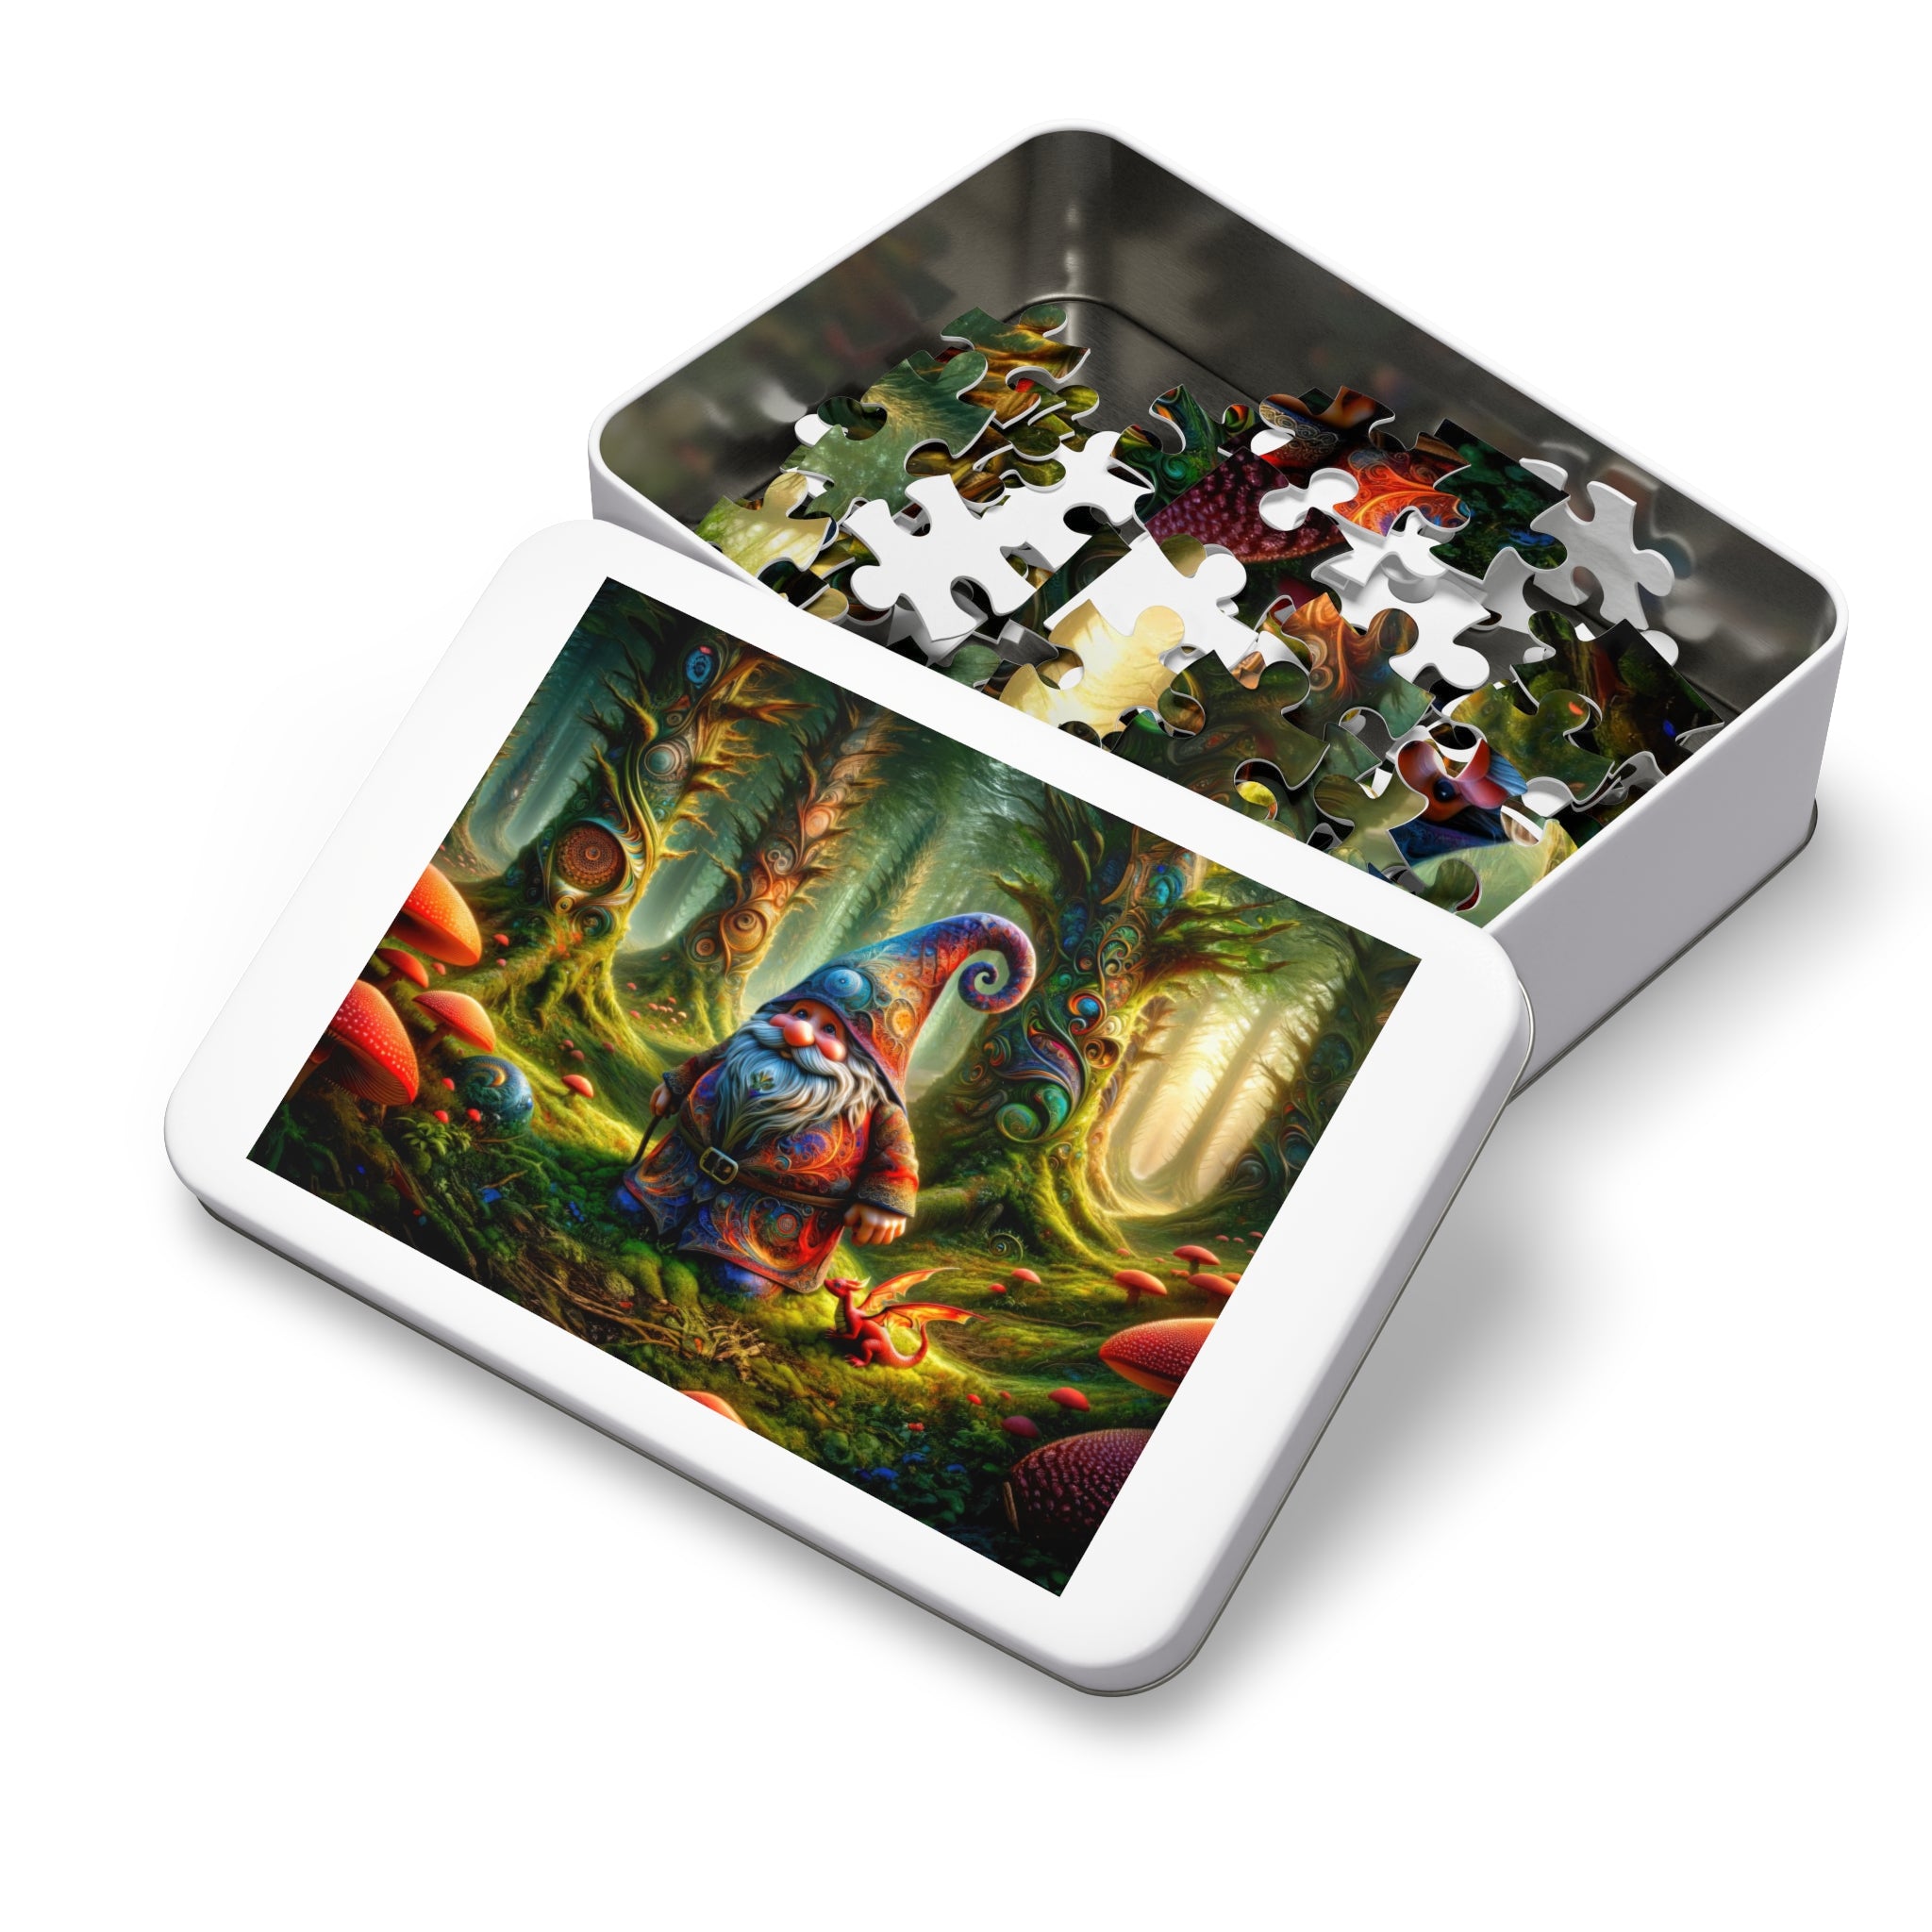 The Gnome's Fractal Forest Jigsaw Puzzle